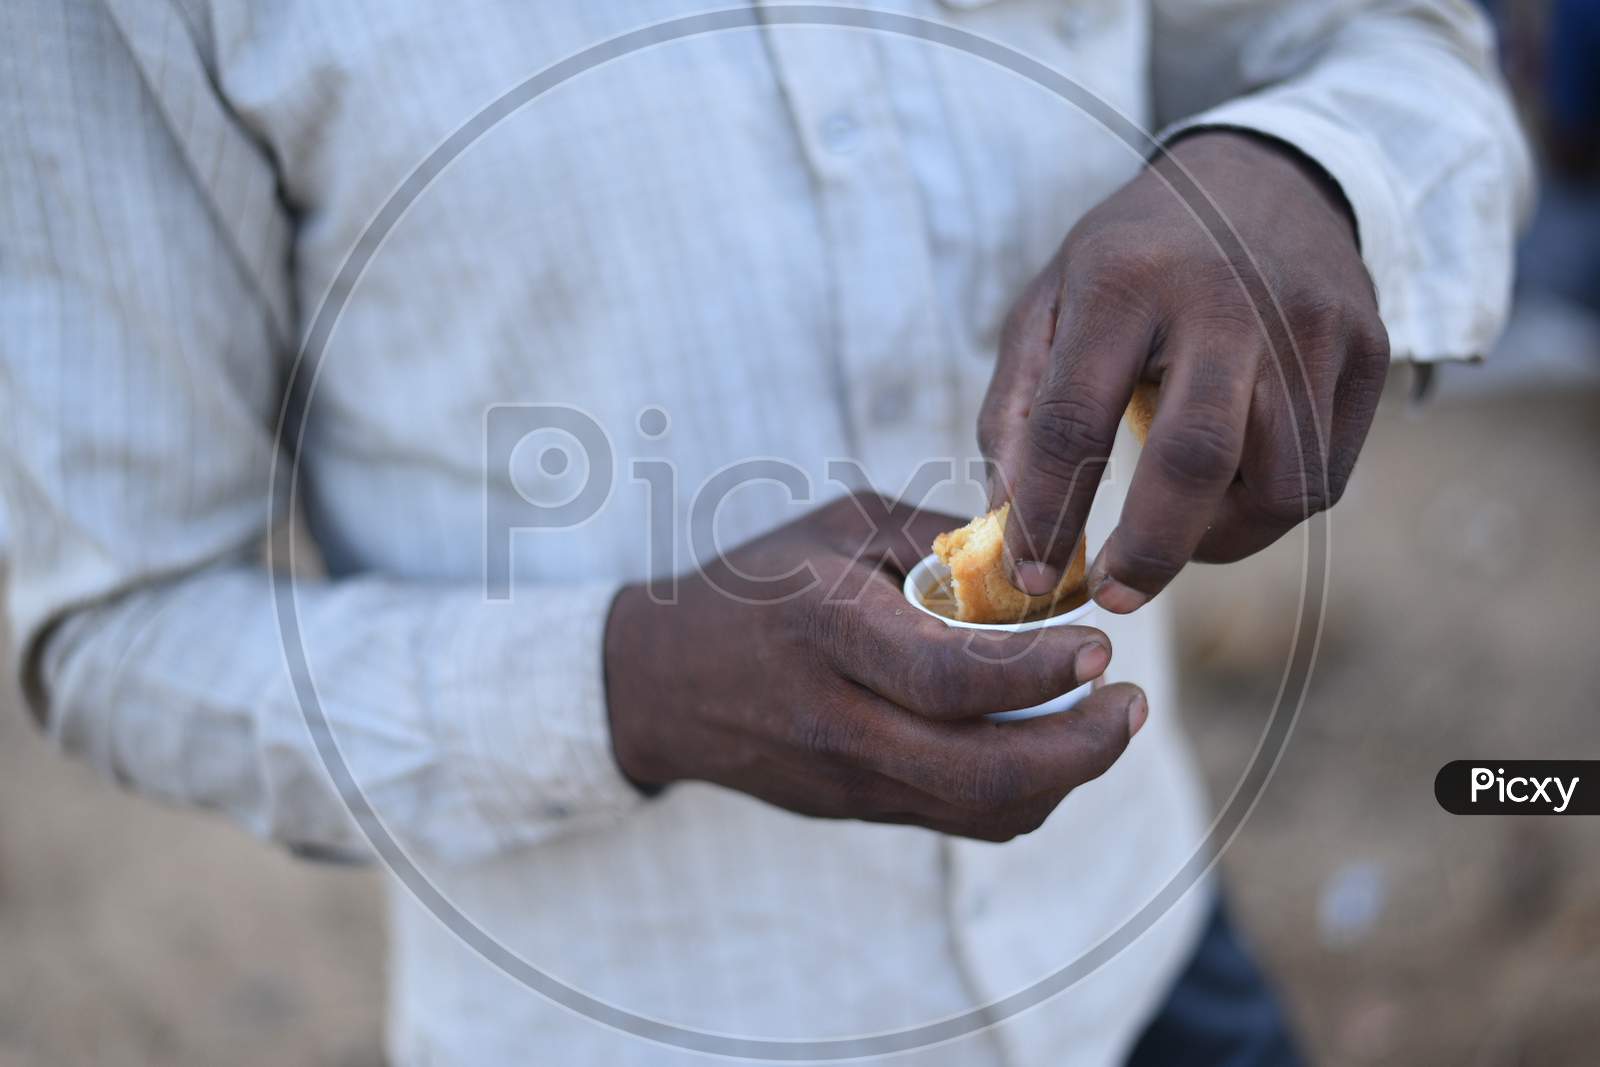 A migrant worker dips a biscuit in tea